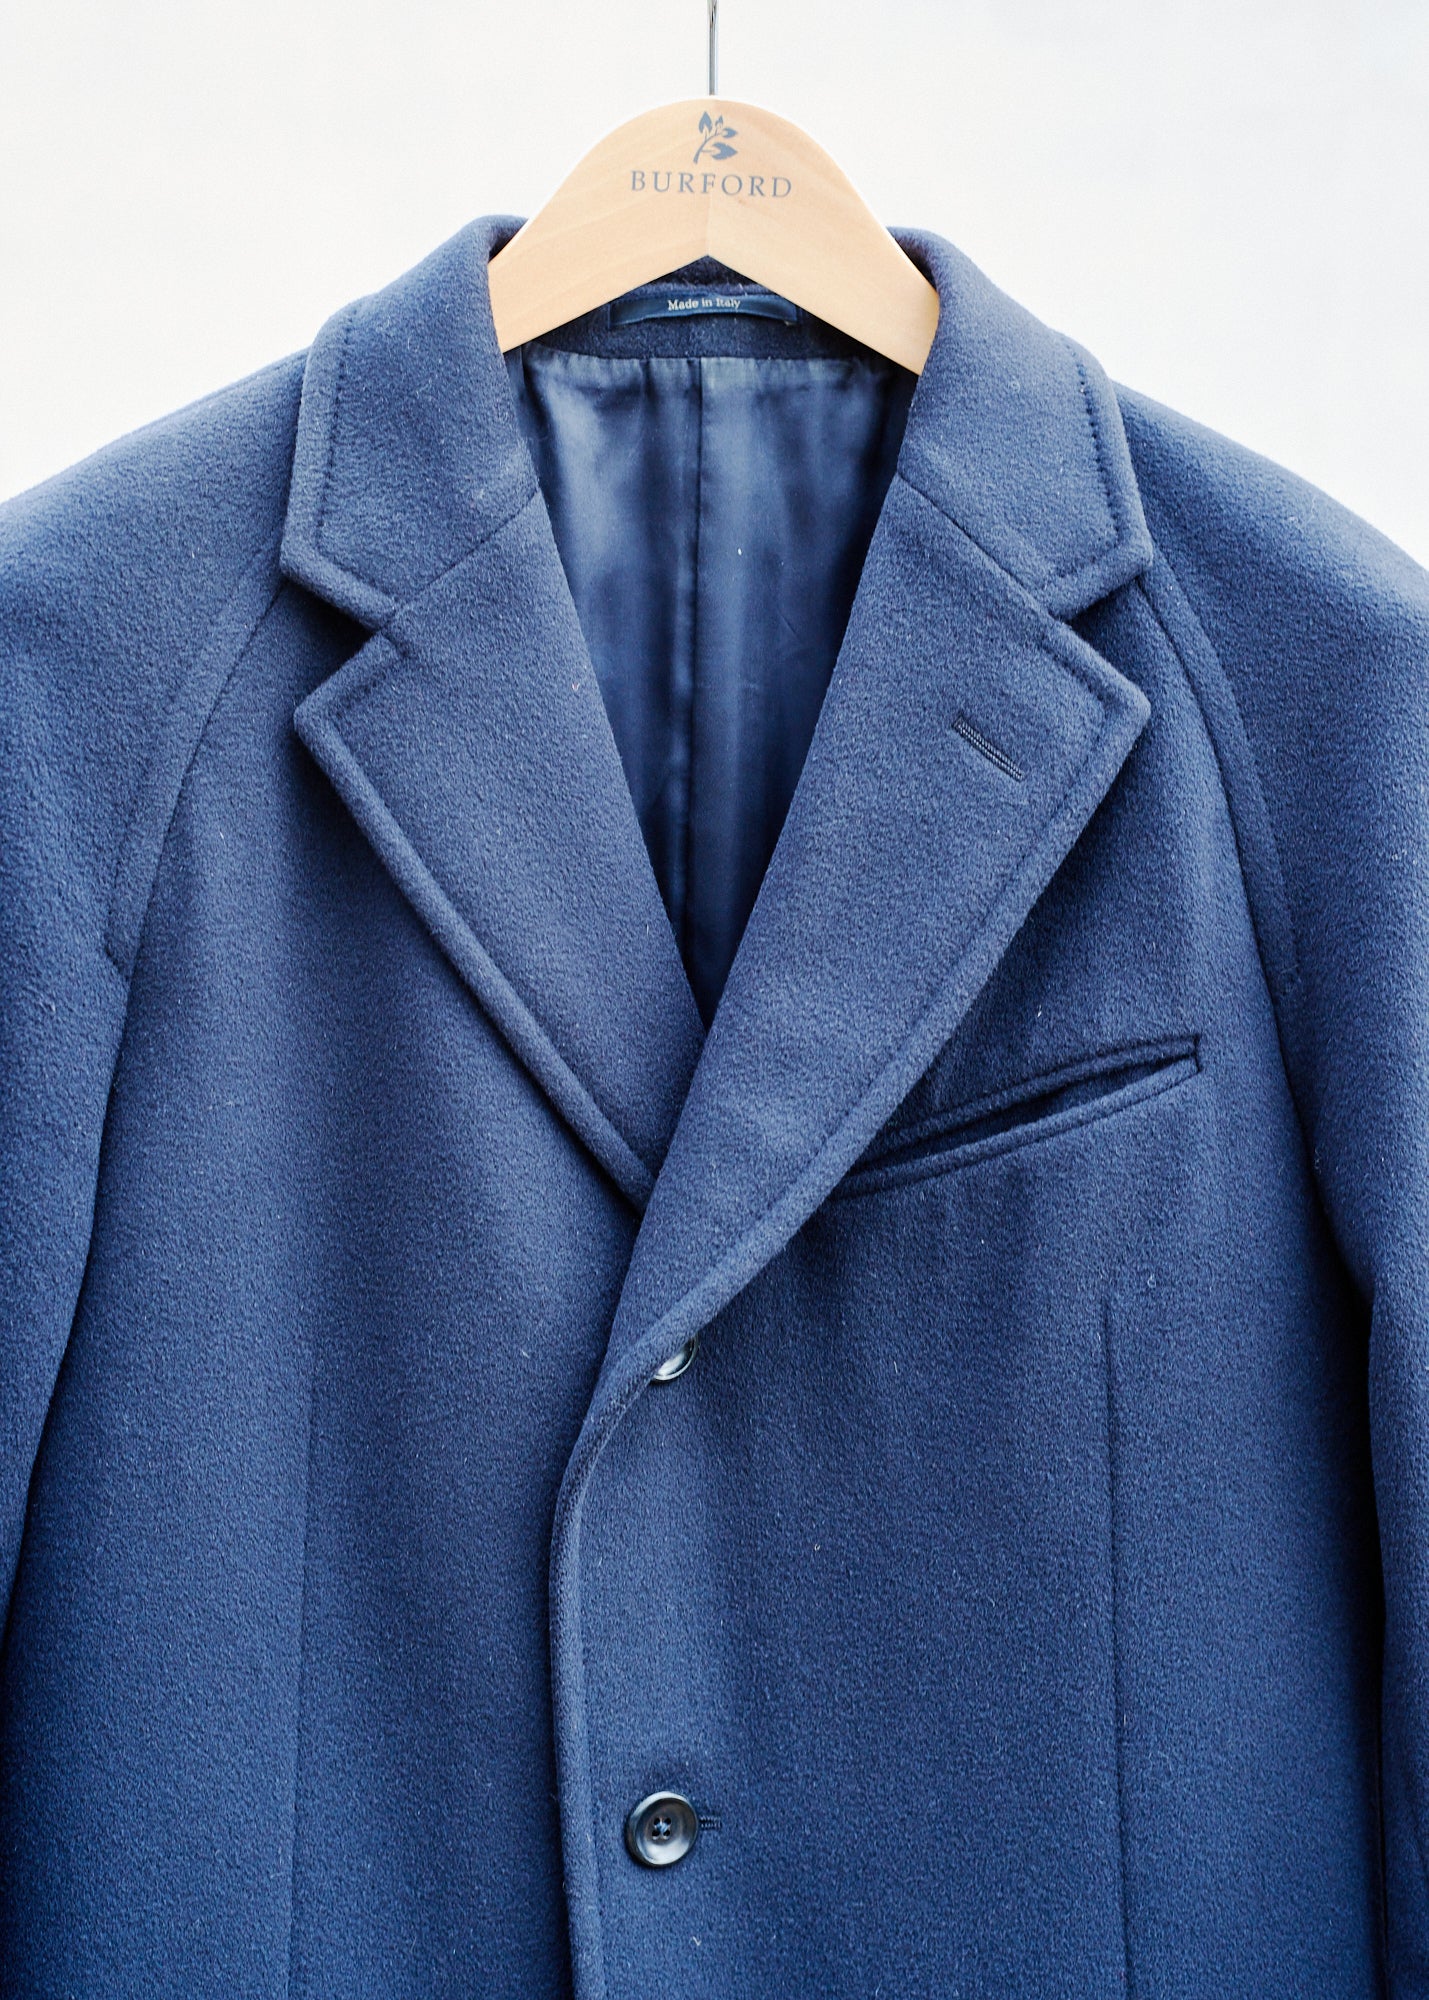 Dunhill Wool & Cashmere Navy Overcoat - M